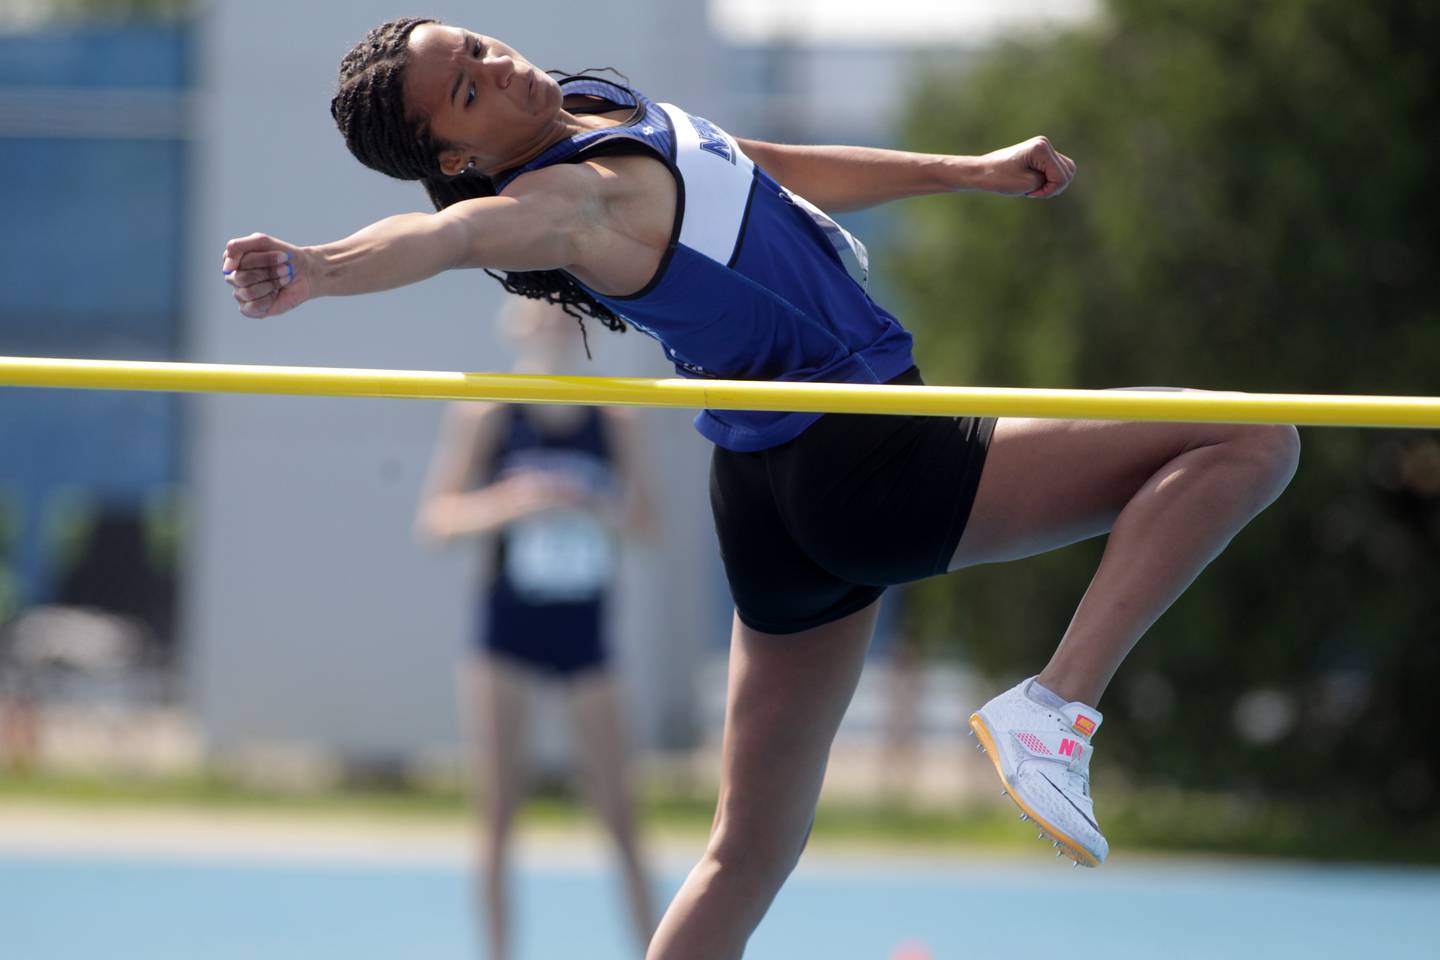 Newark’s Kiara Wesseh competes in the 1A high jump competition during the 2023 IHSA State Track and Field Finals at Eastern Illinois University in Charleston.